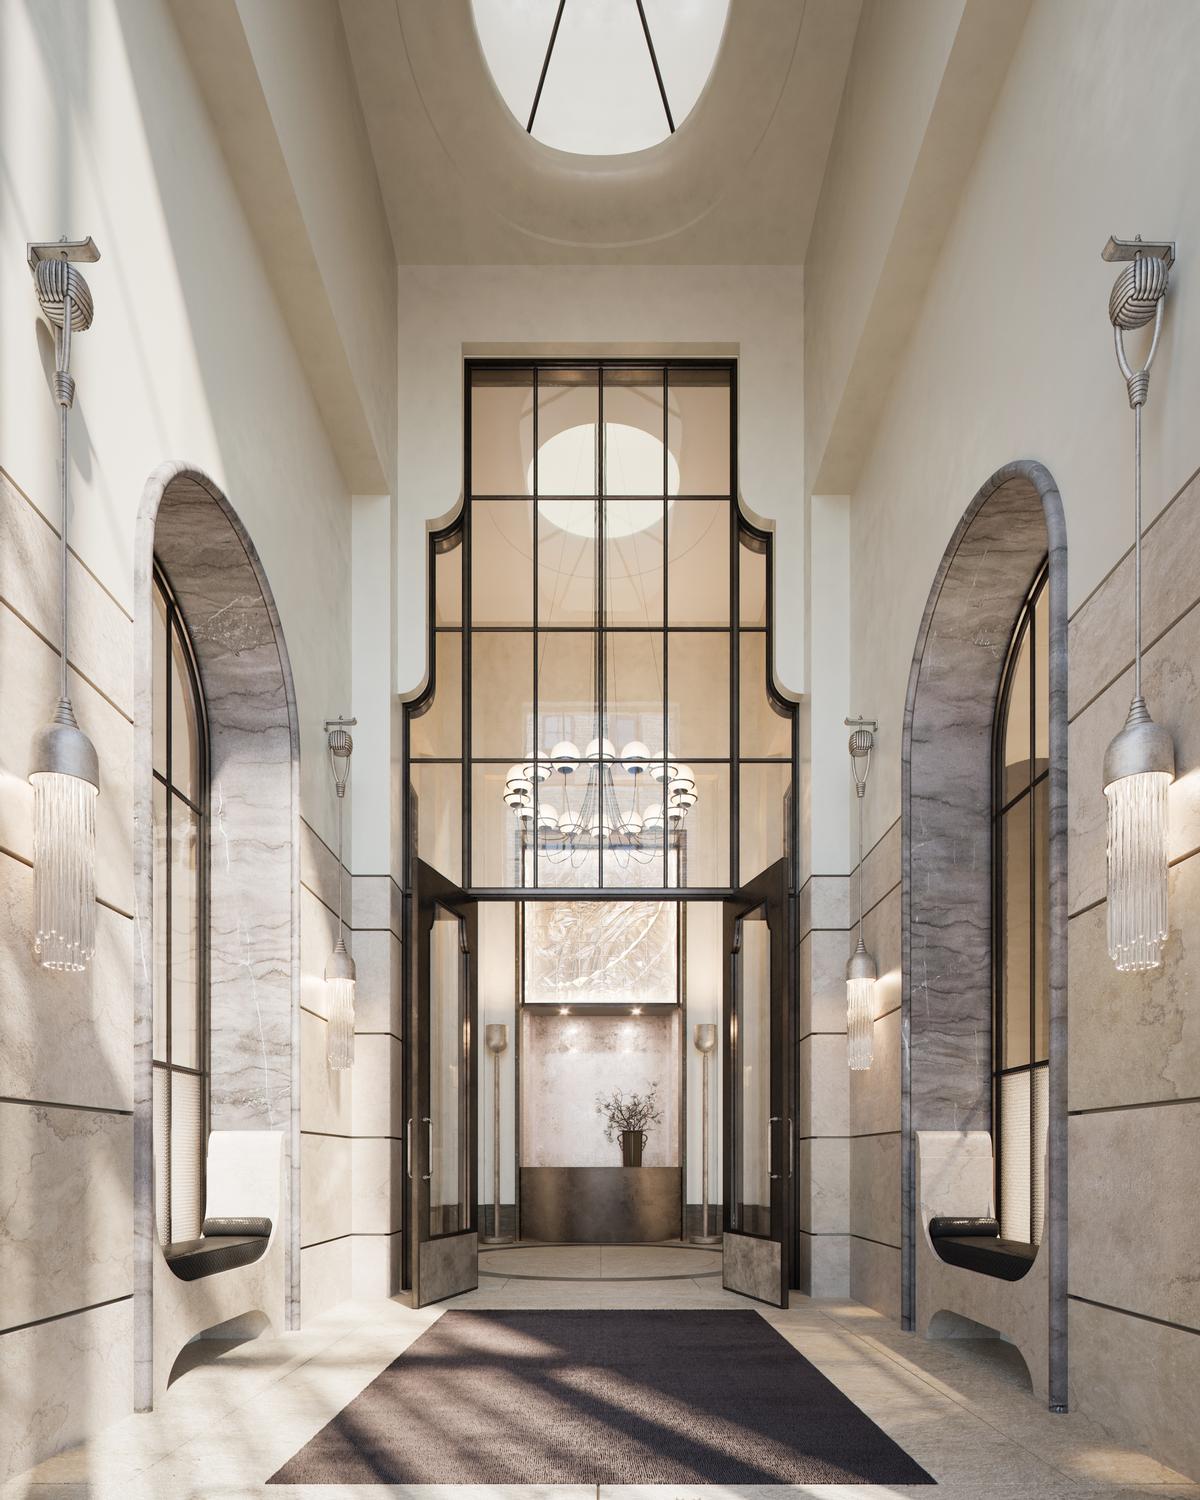 The vestibule has a skylight that allows natural light into the space / Noe & Associates / The Boundary